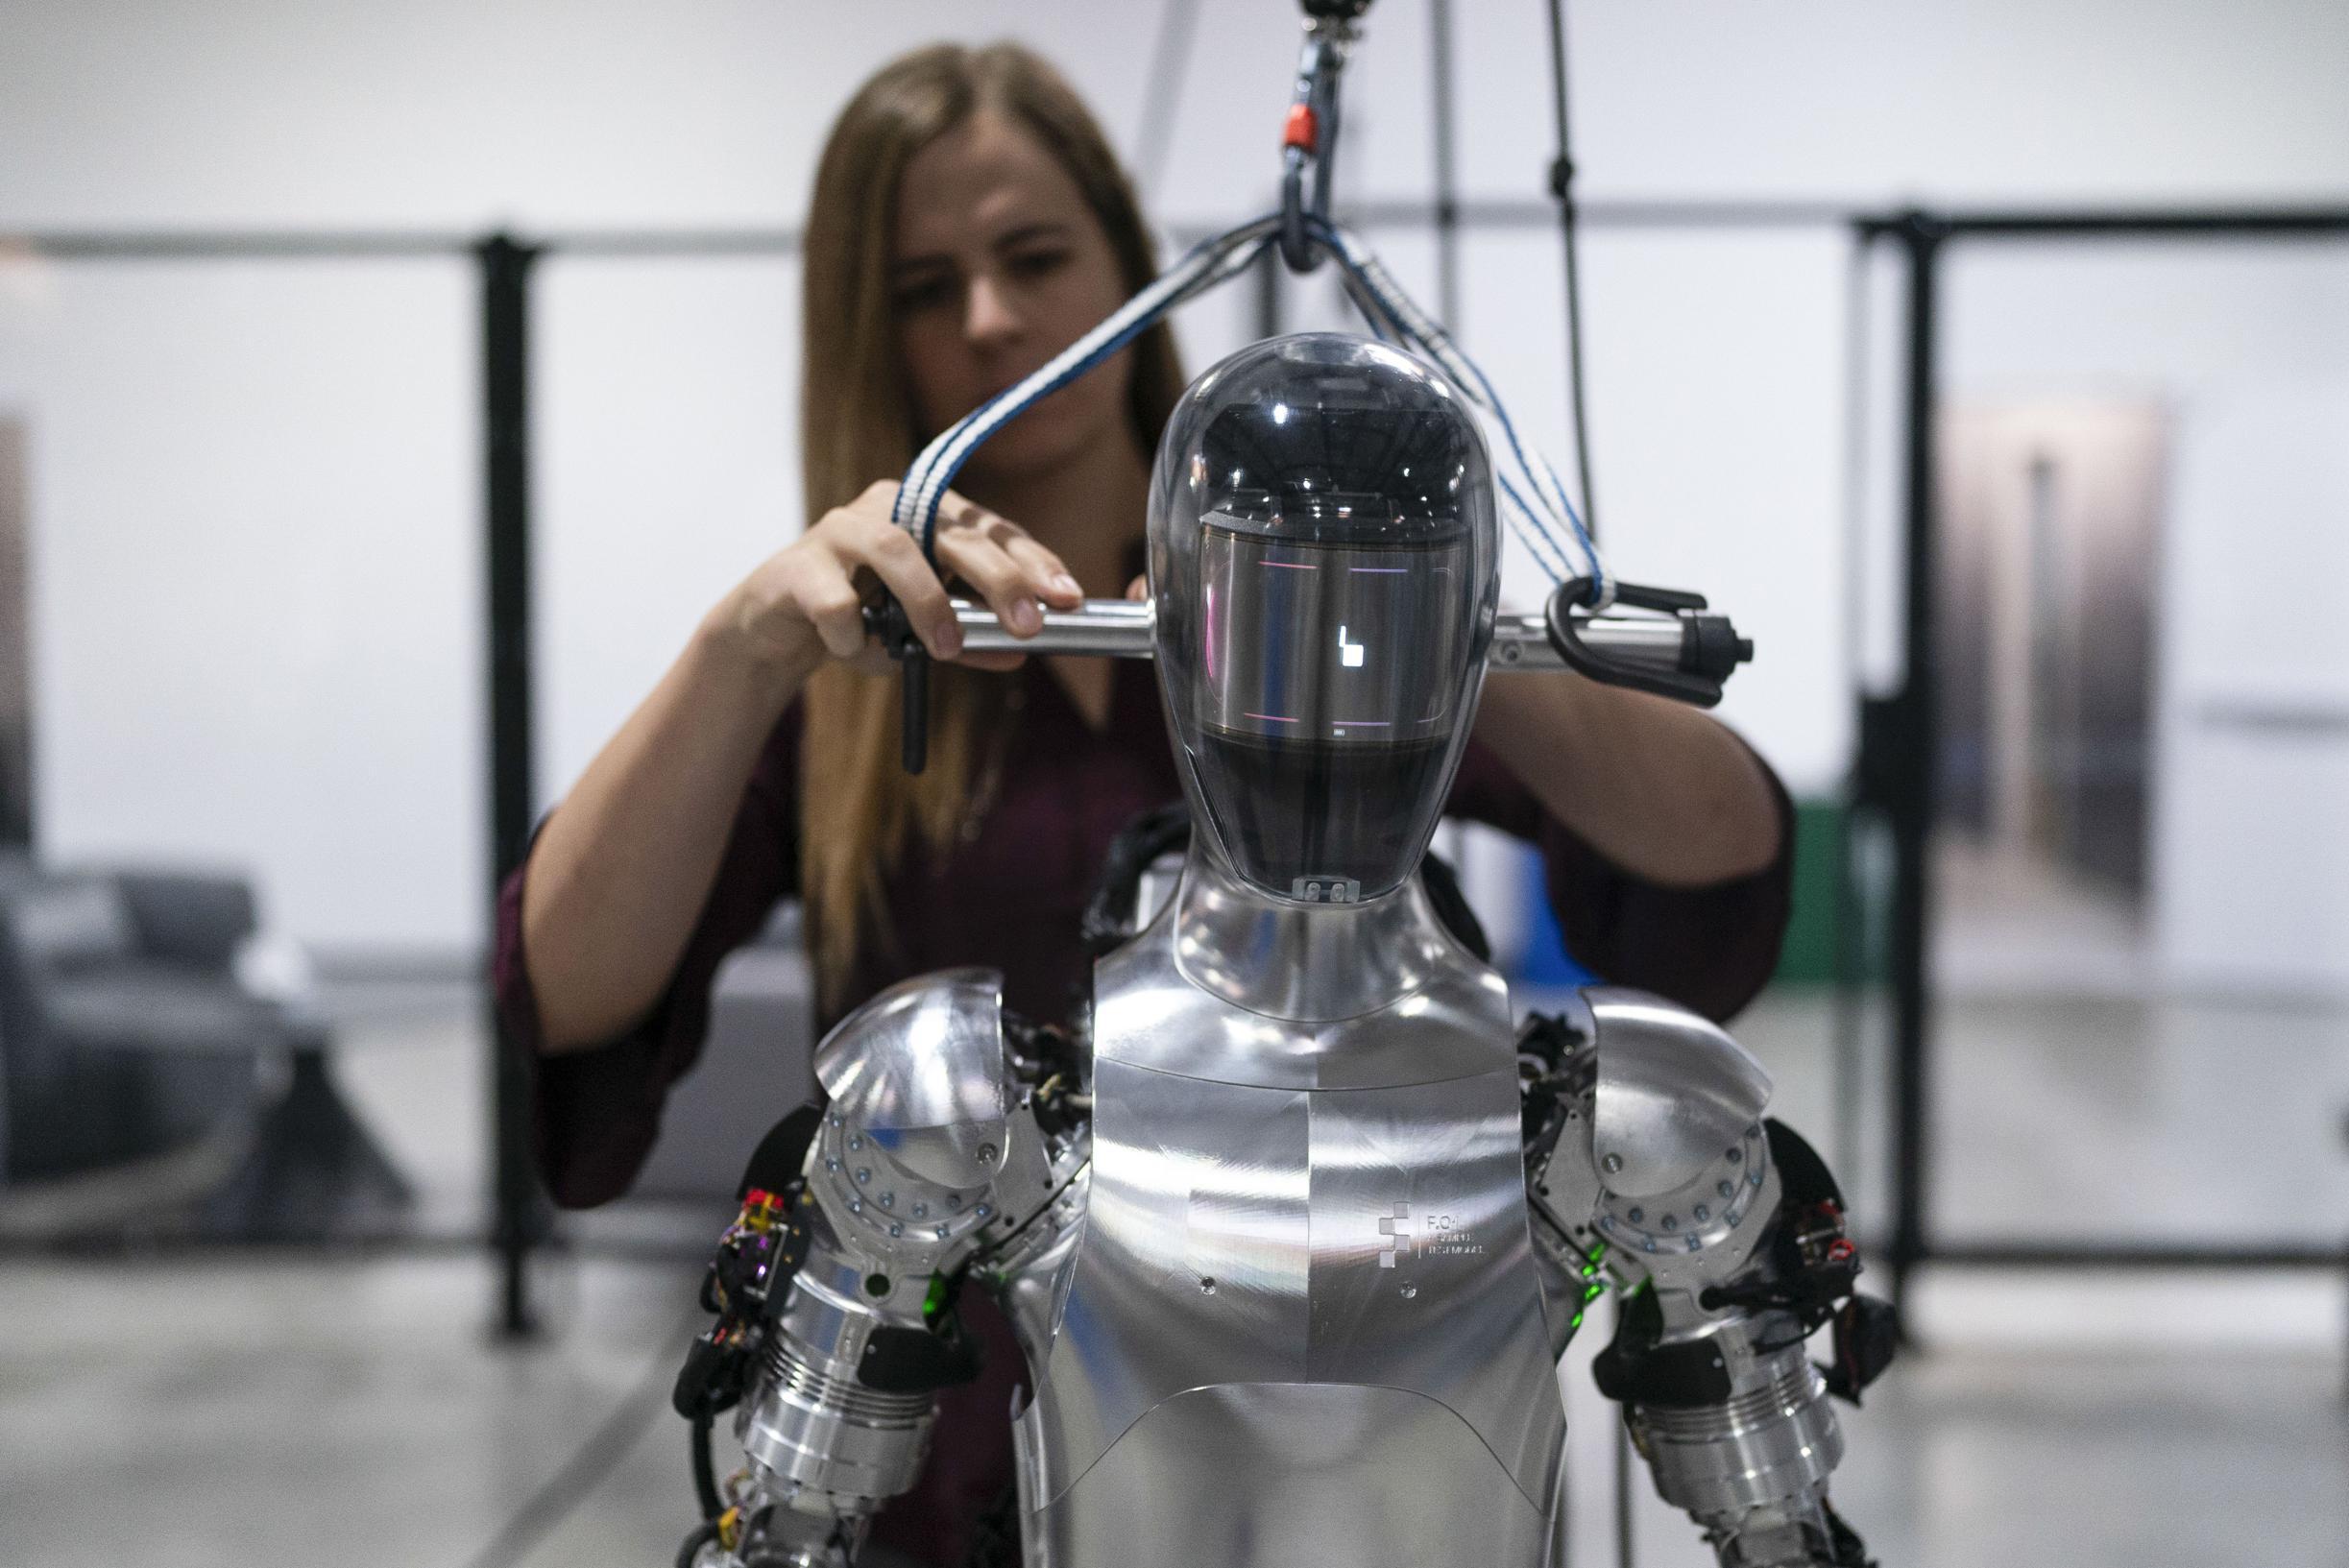 New Robot Appears More Human-Like, Thanks to Collaboration with ChatGPT